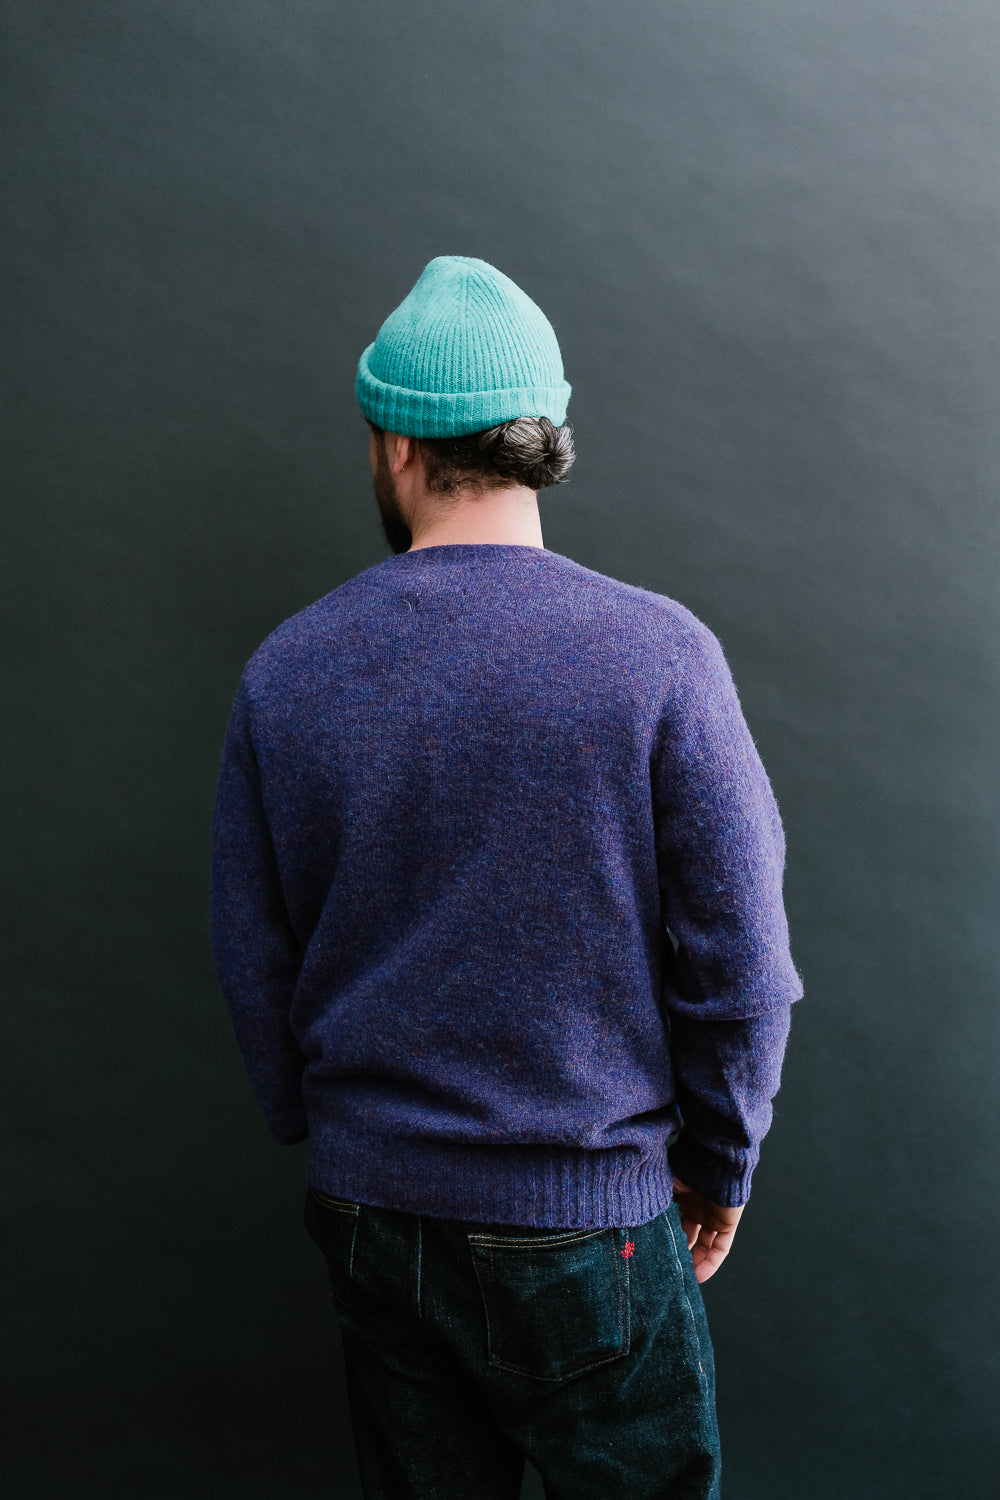 Birth of the Cool Sweater - Lavender